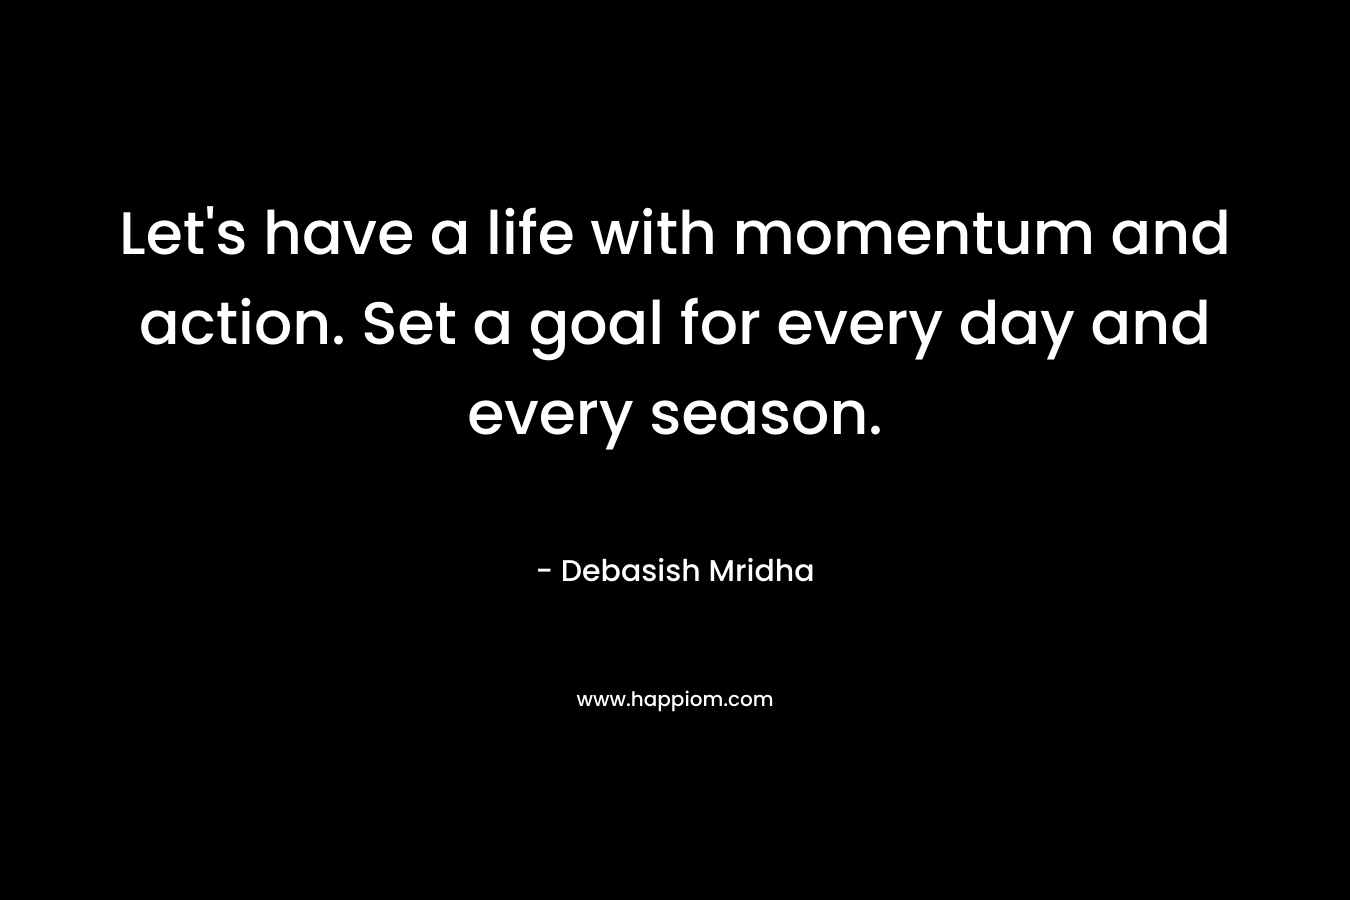 Let's have a life with momentum and action. Set a goal for every day and every season.